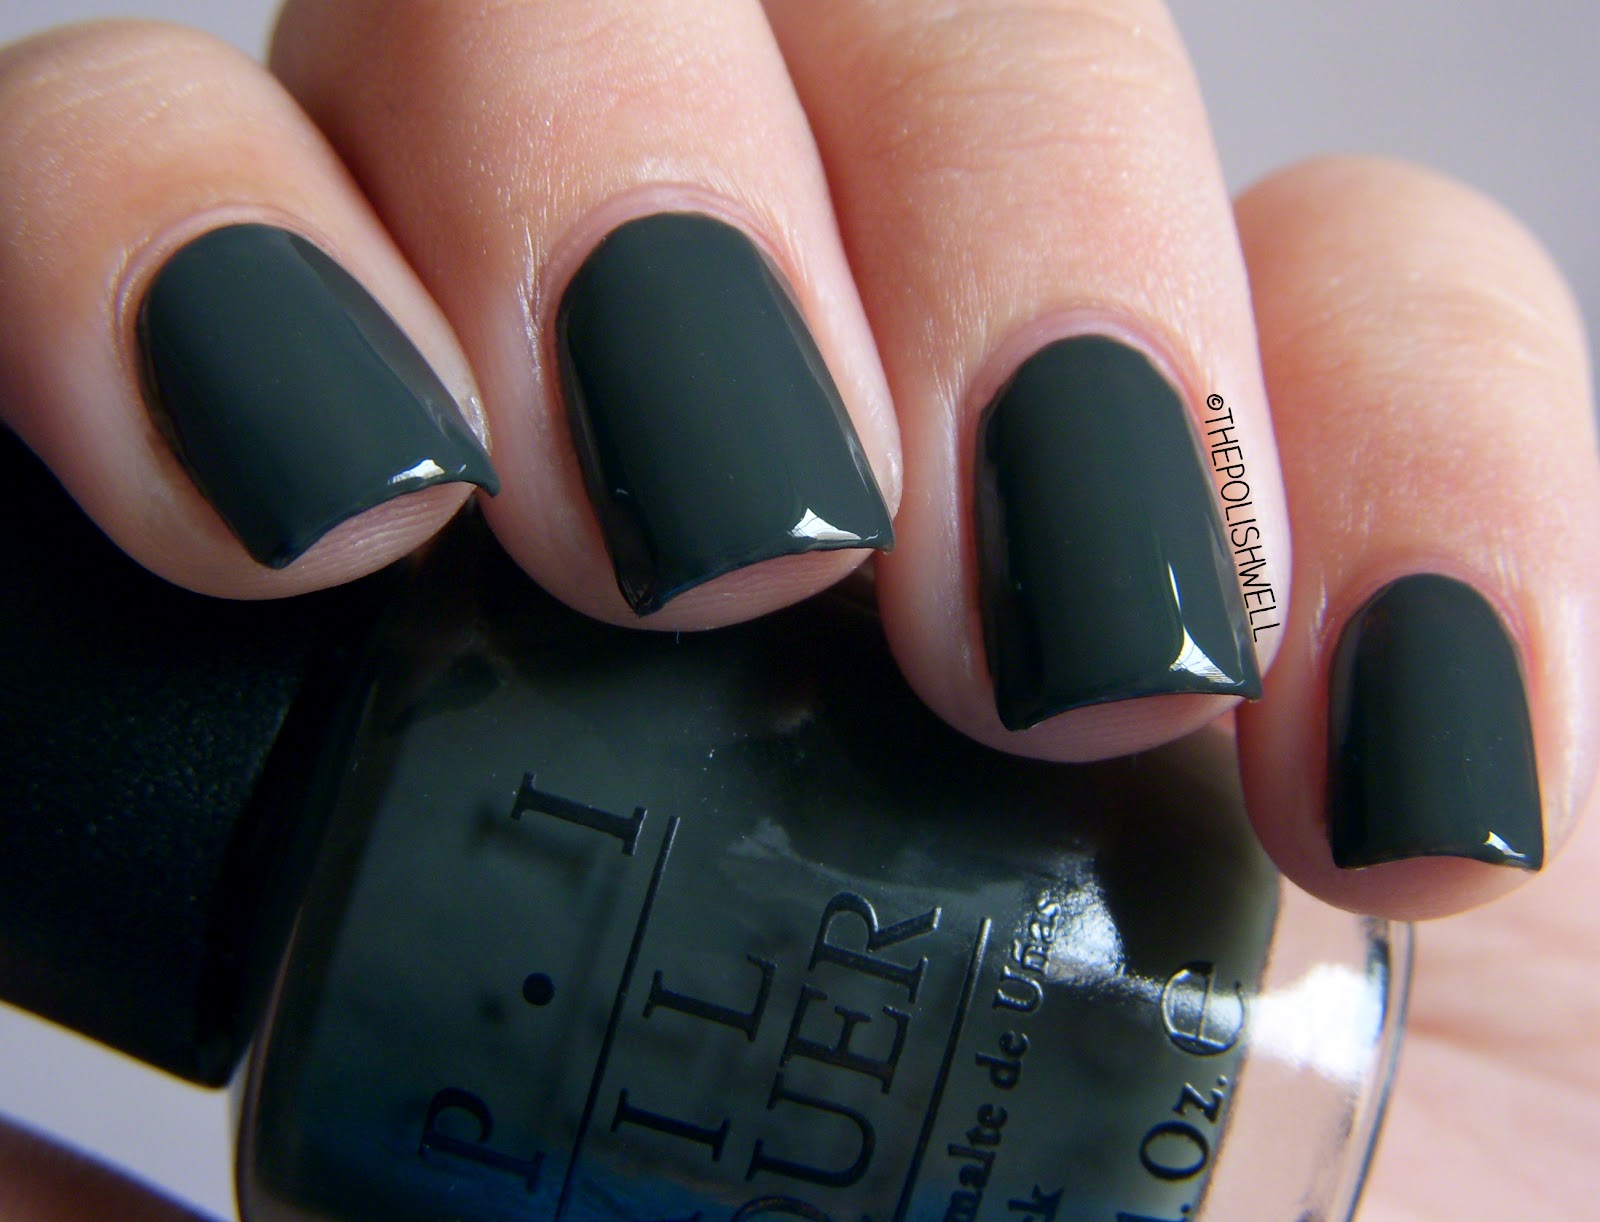 2. OPI "Berlin There Done That" from the Germany Collection - wide 4